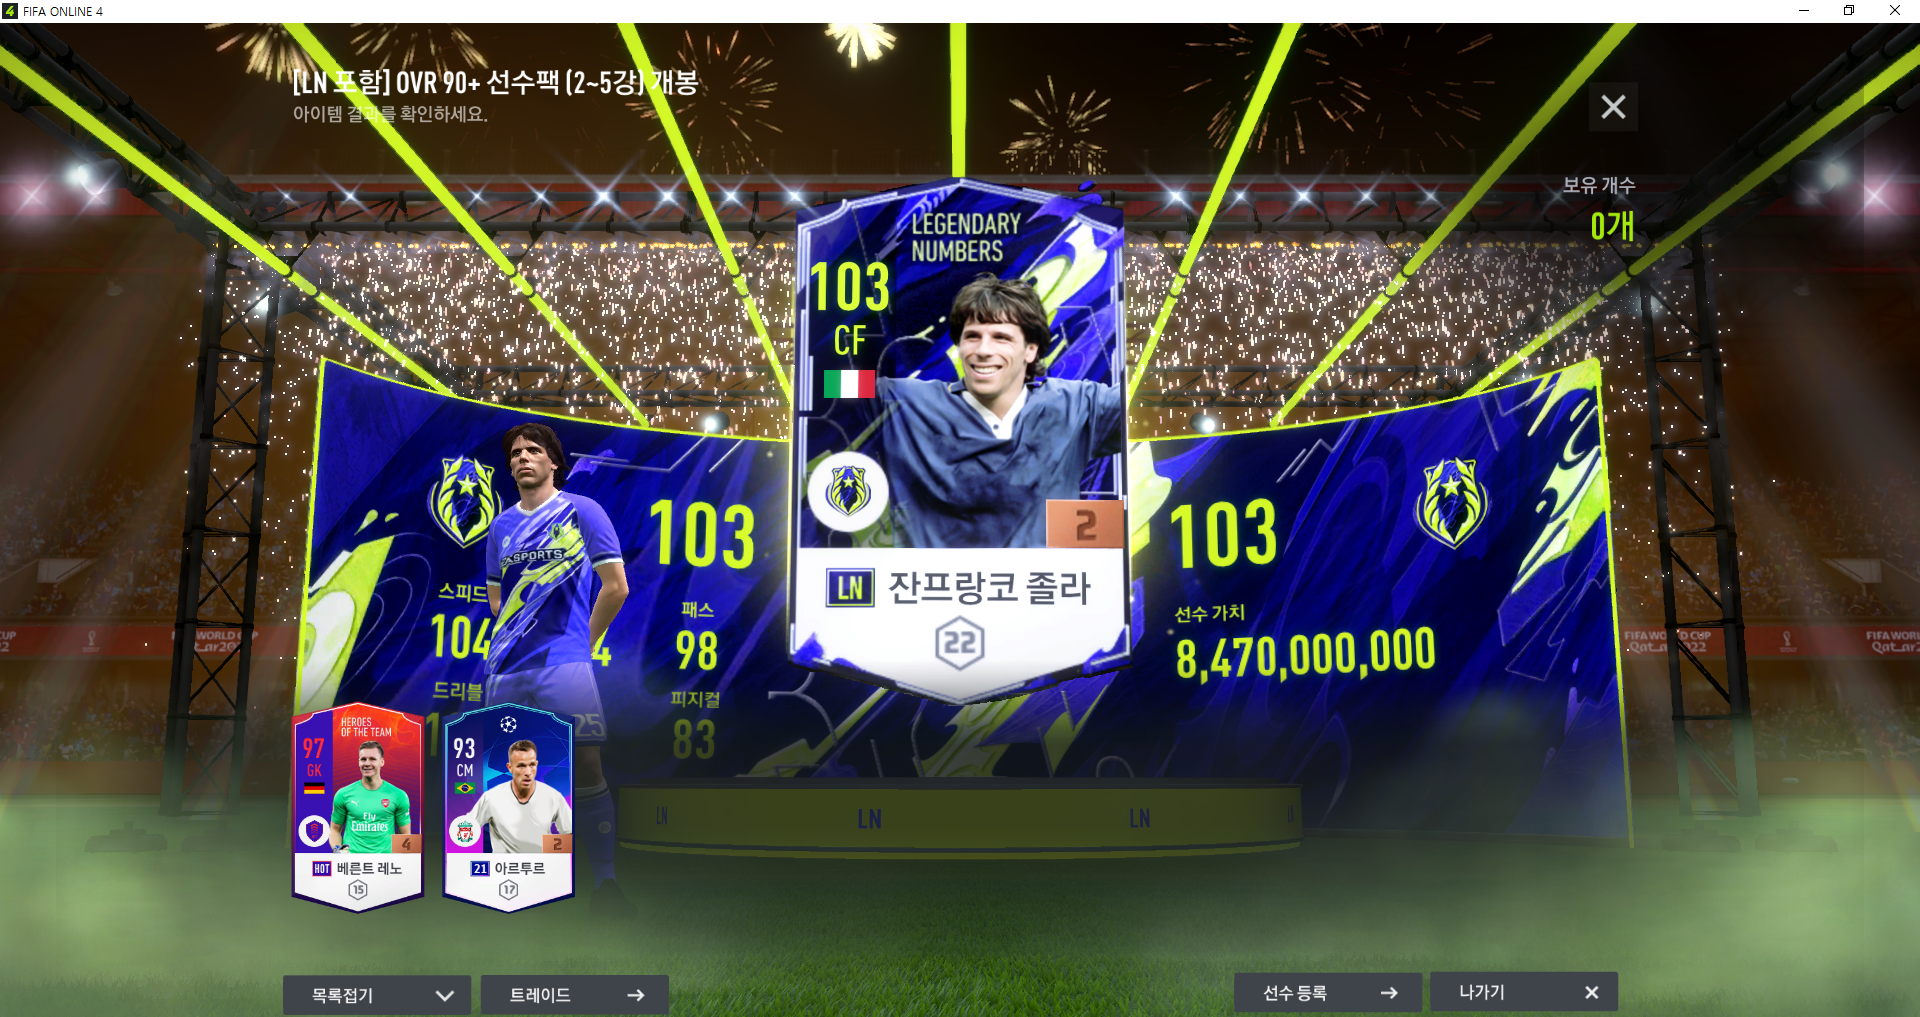 FIFA ONLINE 4 2022-11-28 오후 7_24_46.png